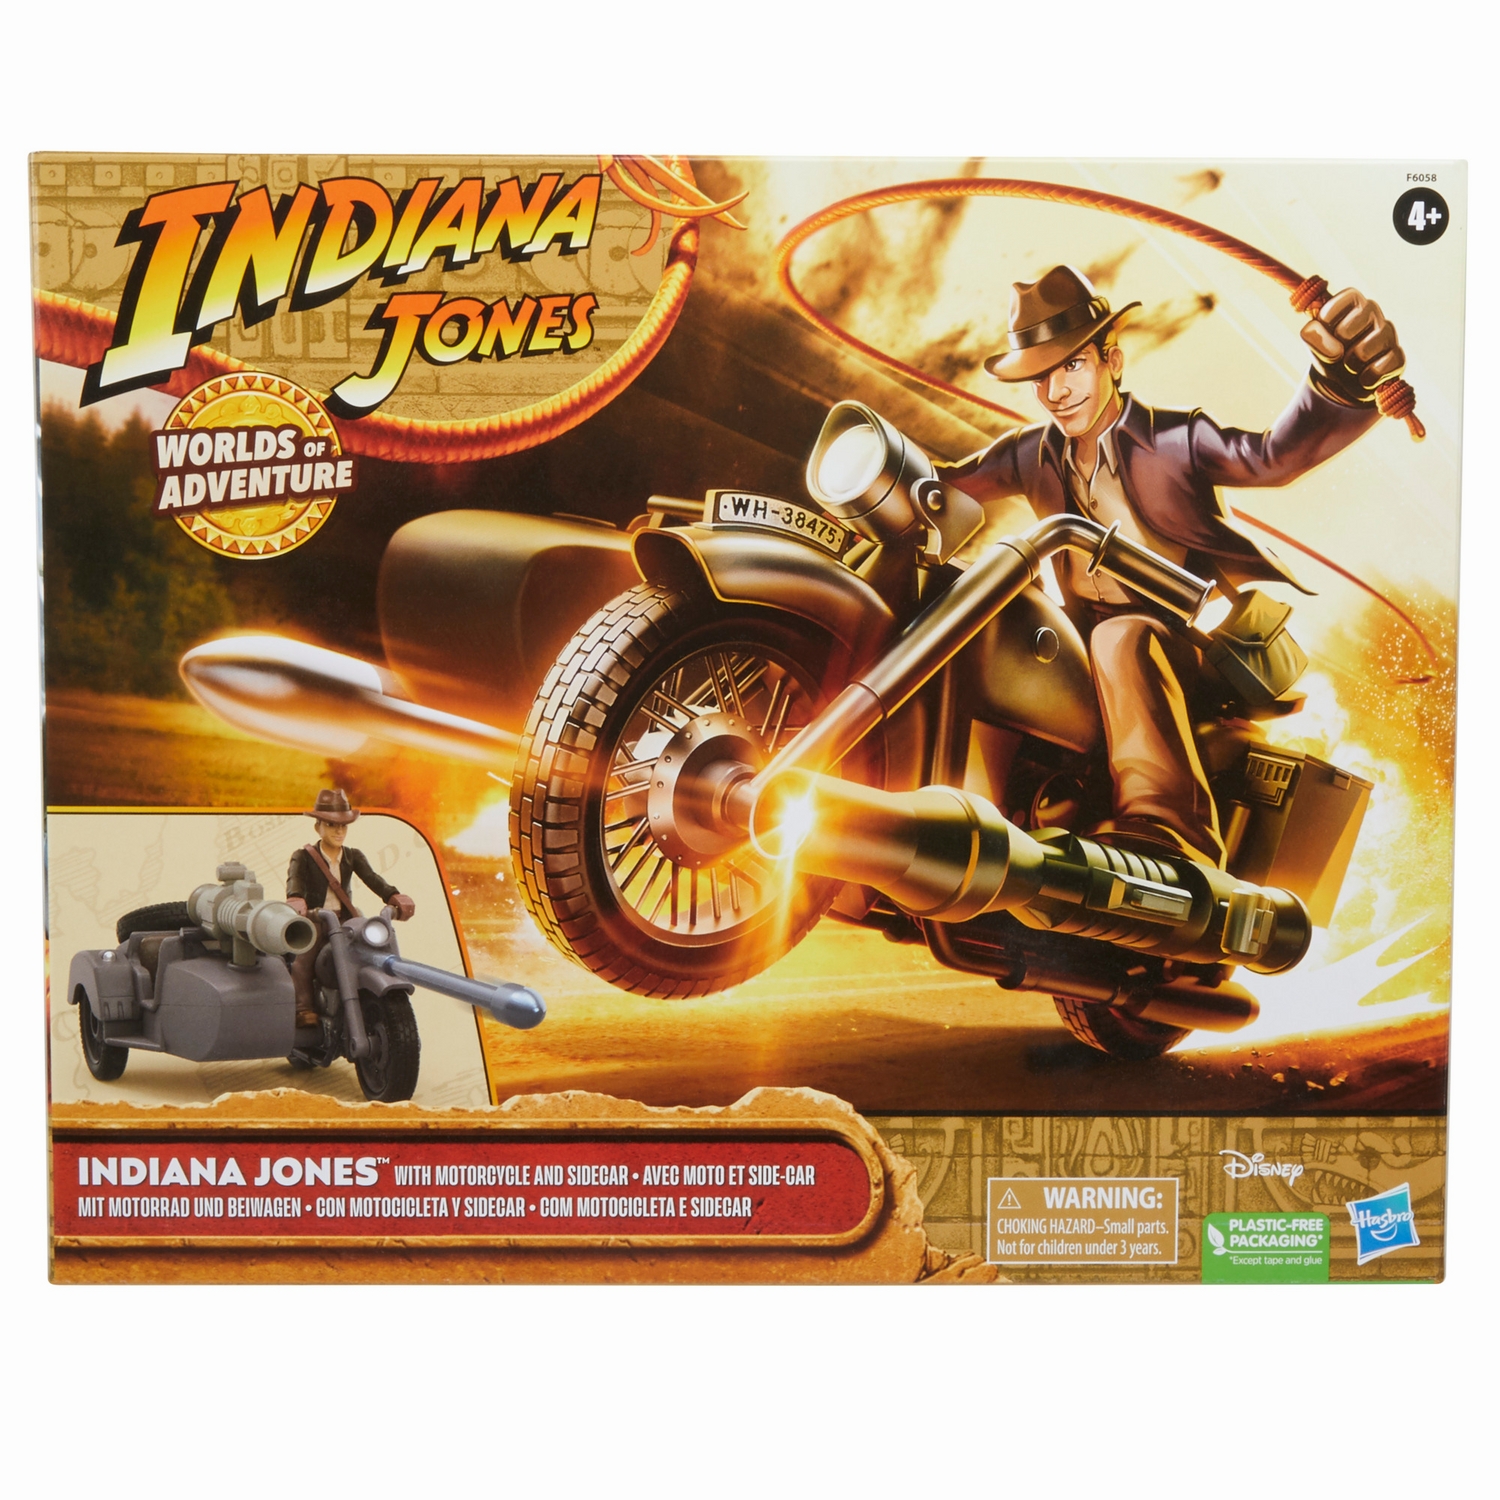 INDIANA JONES WORLDS OF ADVENTURE INDIANA JONES WITH MOTORCYCLE AND SIDECAR - Package 2.jpg